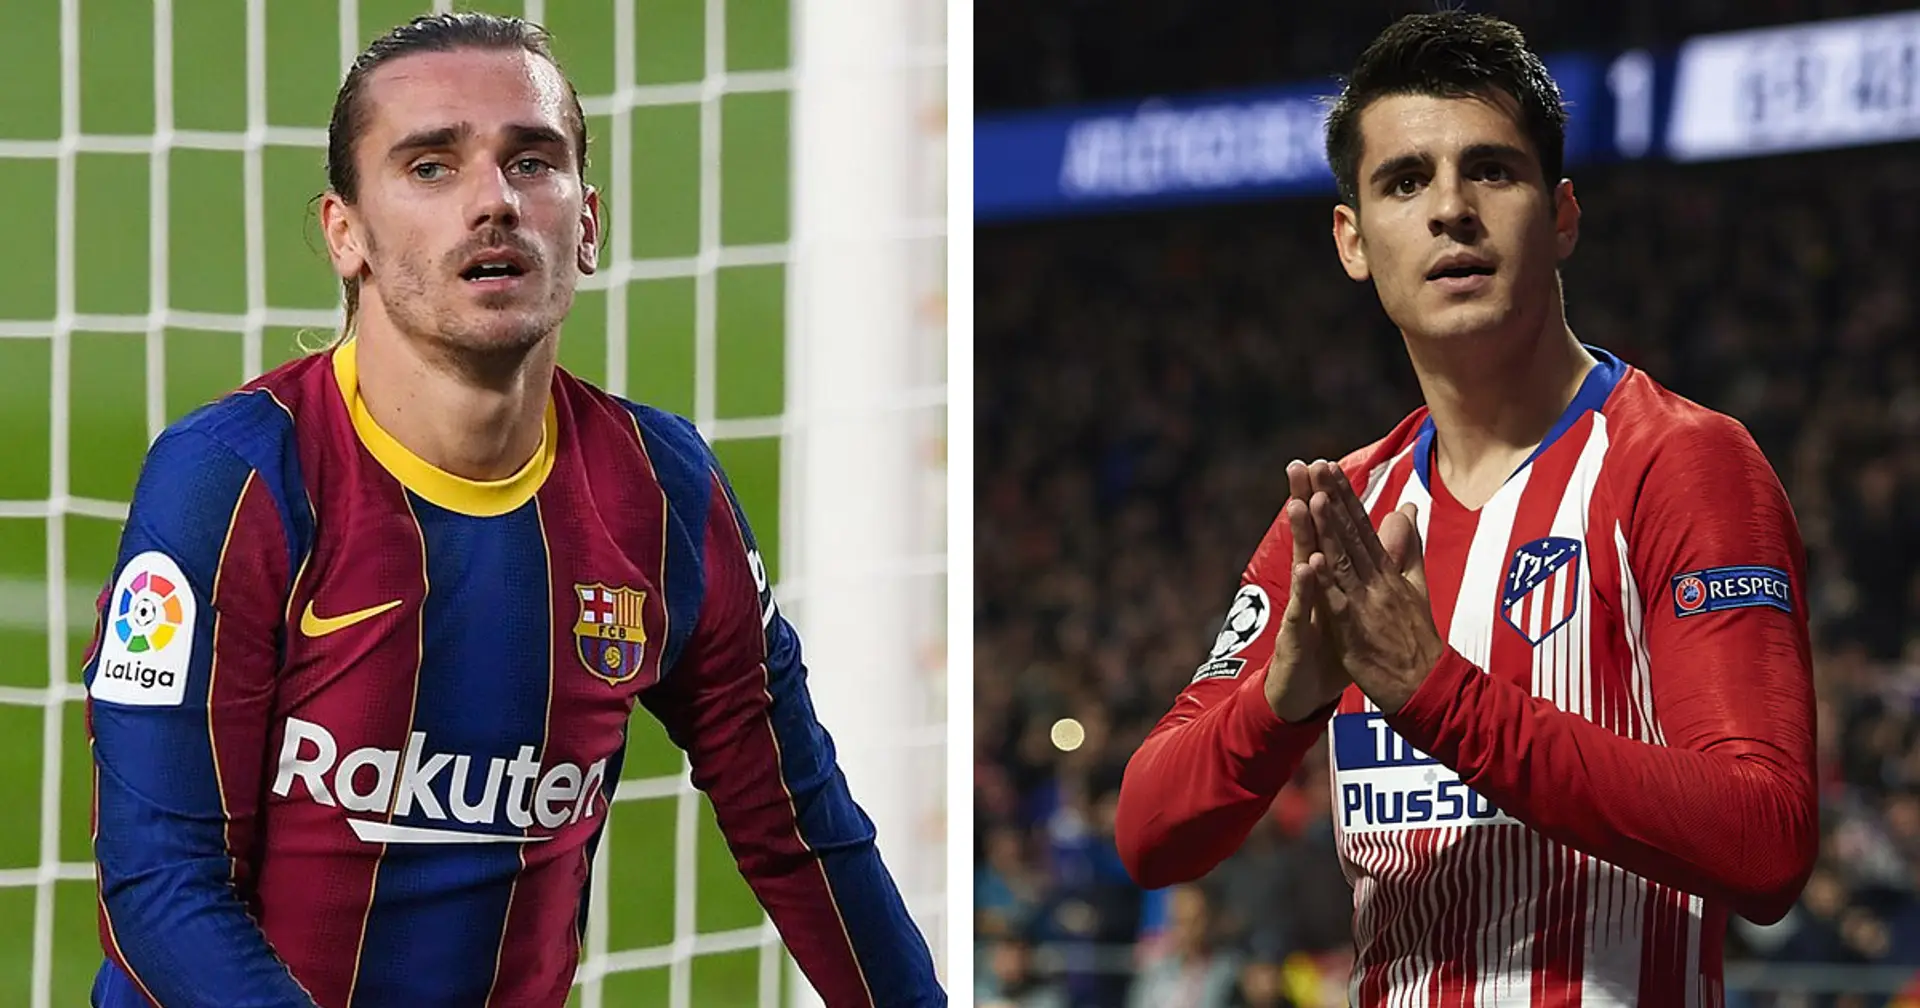 Atletico offered Morata plus 2 more players in exchange for Griezmann but Bartomeu refused (reliability: 4 stars)